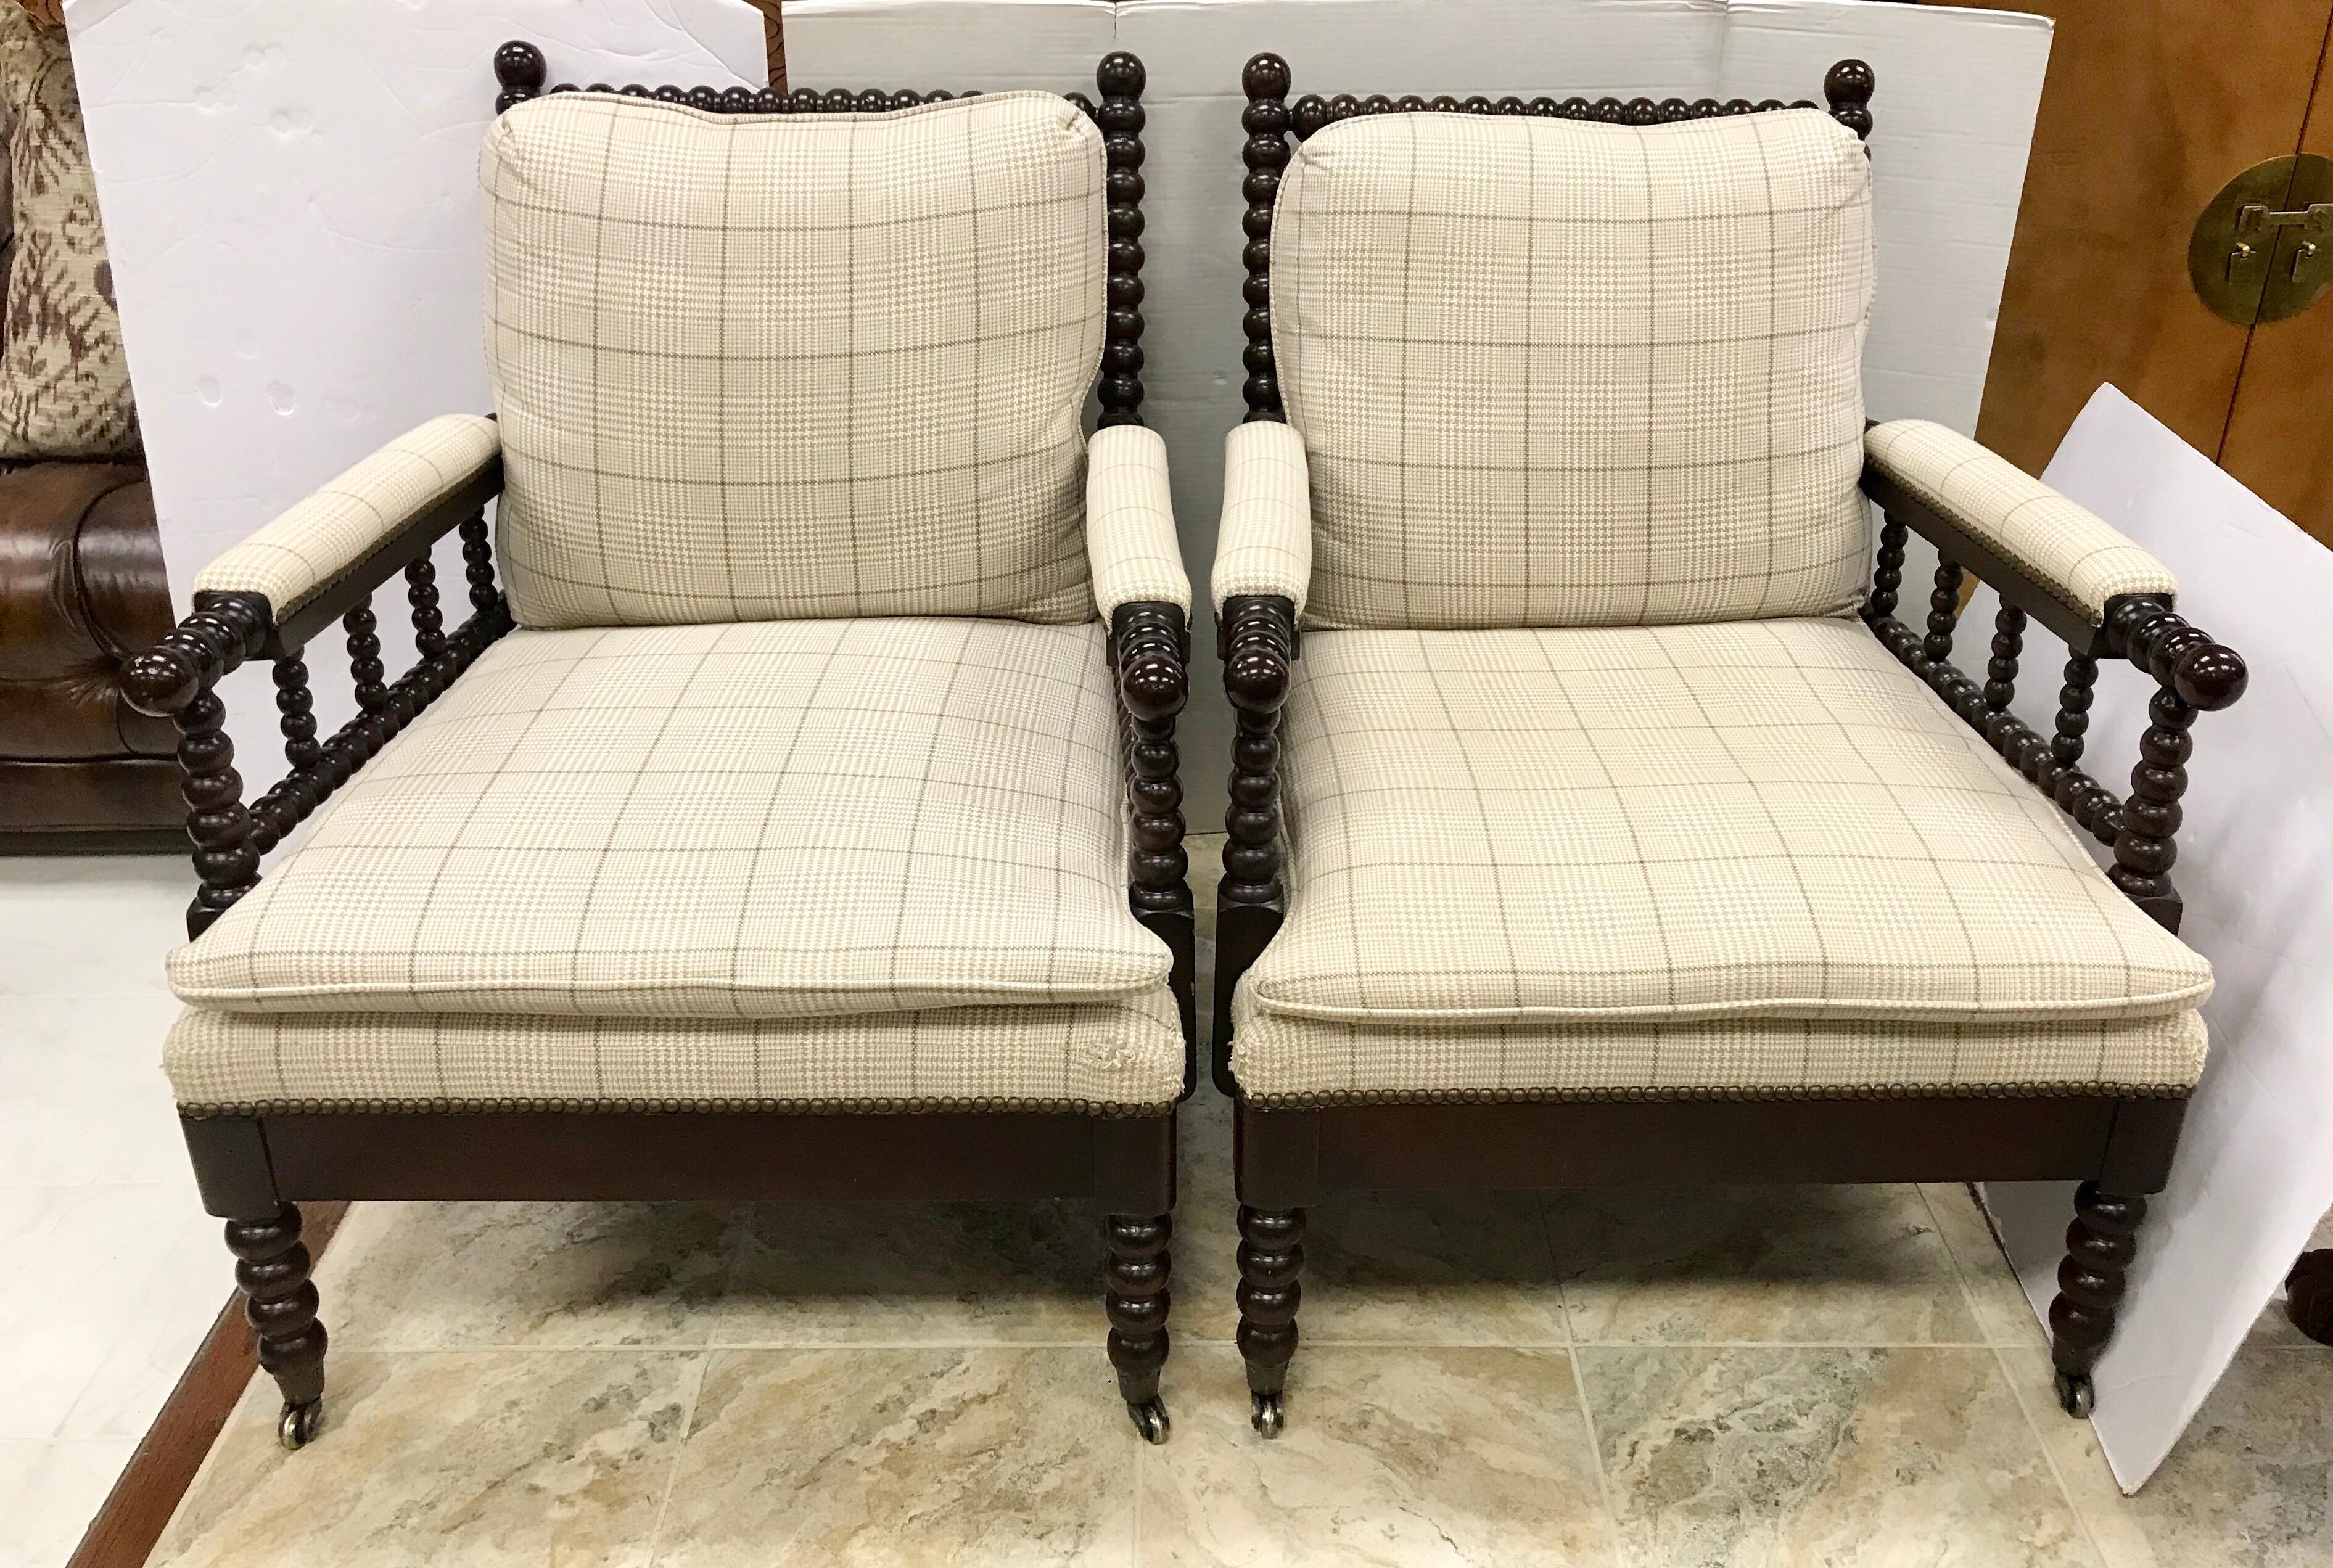 Pair of mahogany spool armchairs by Vanguard, circa 1990s. Upholstered in a neutral plaid and features
casters on front legs and nailheads throughout.